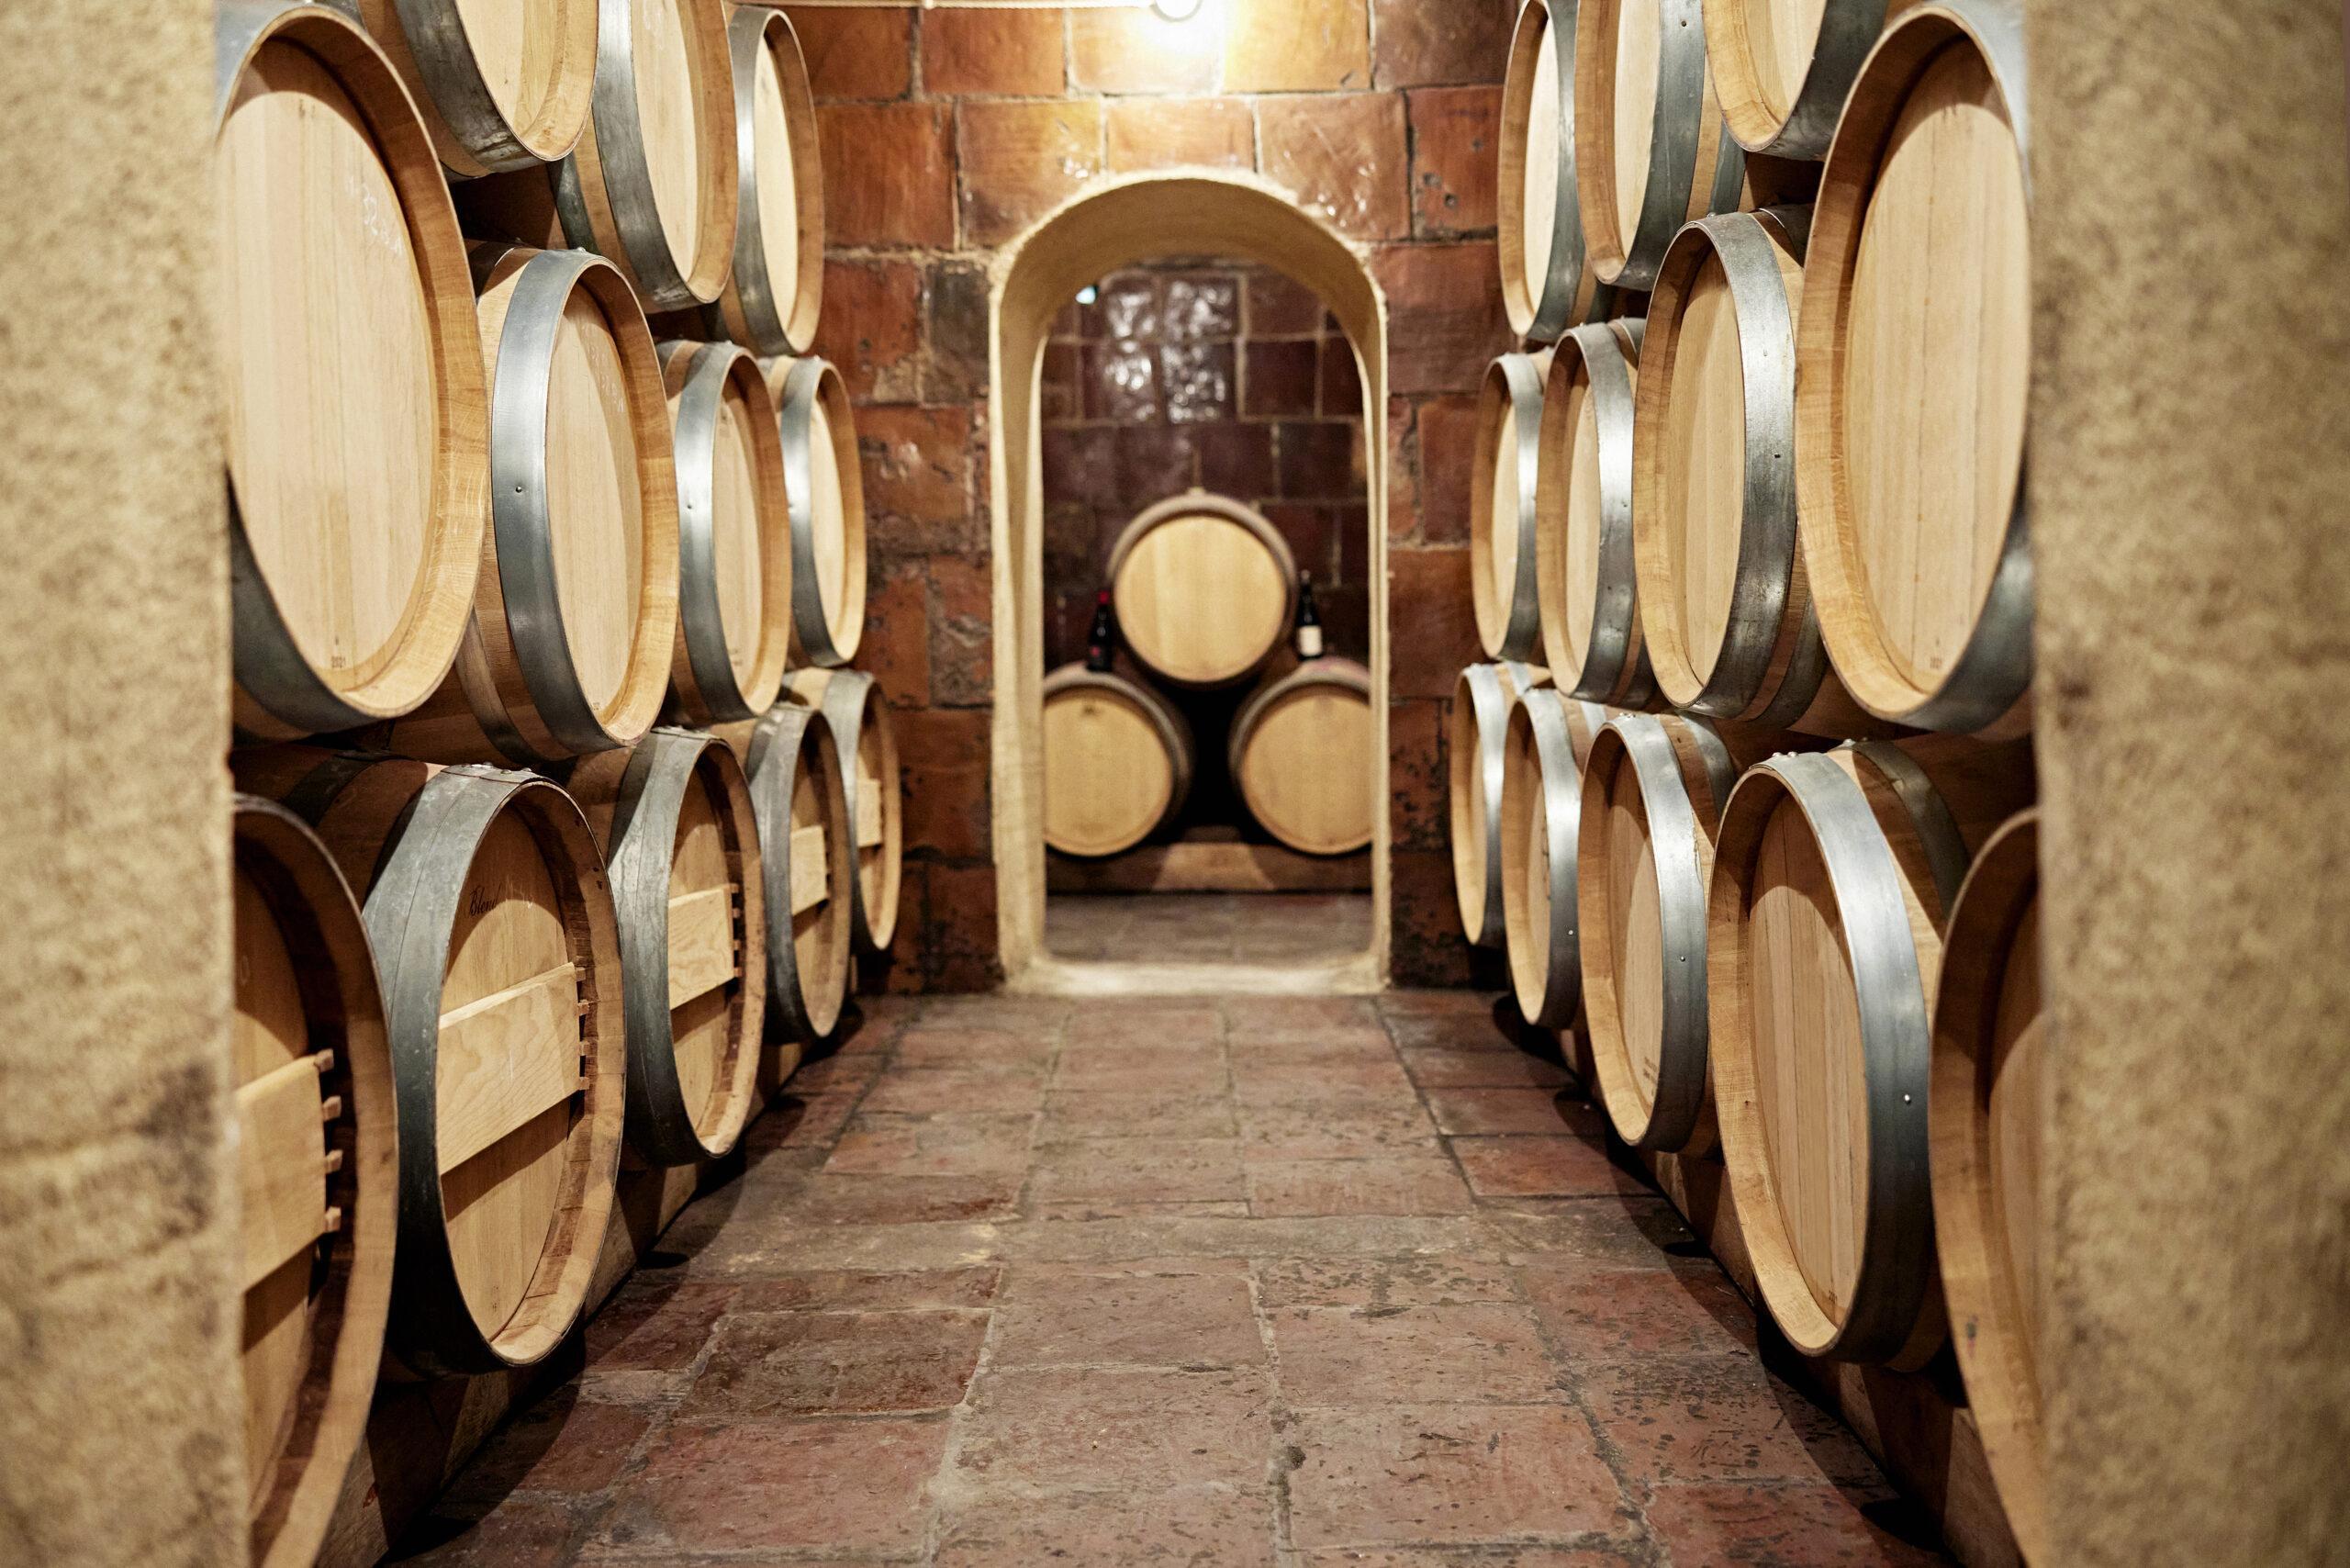 Underground cellar occupied by the type of barrel most commonly used during the wine aging process, which adds oxygen, tannins and depth of flavour.